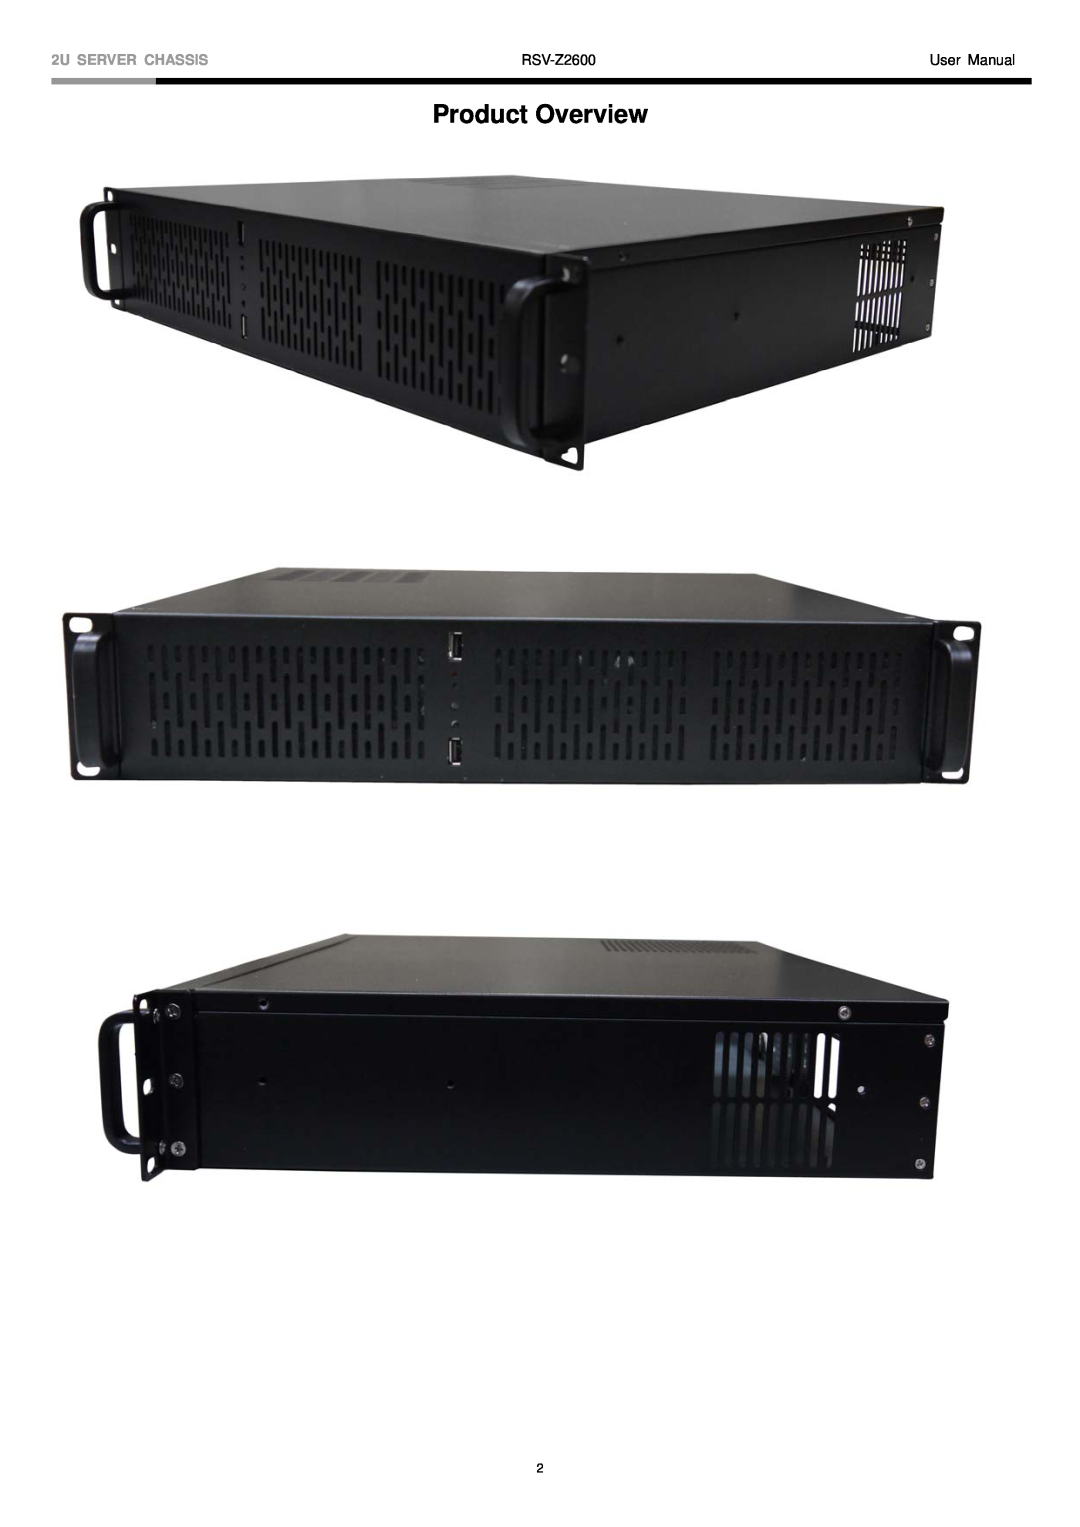 Rosewill RSV-Z2600 user manual Product Overview, 2U SERVER CHASSIS 